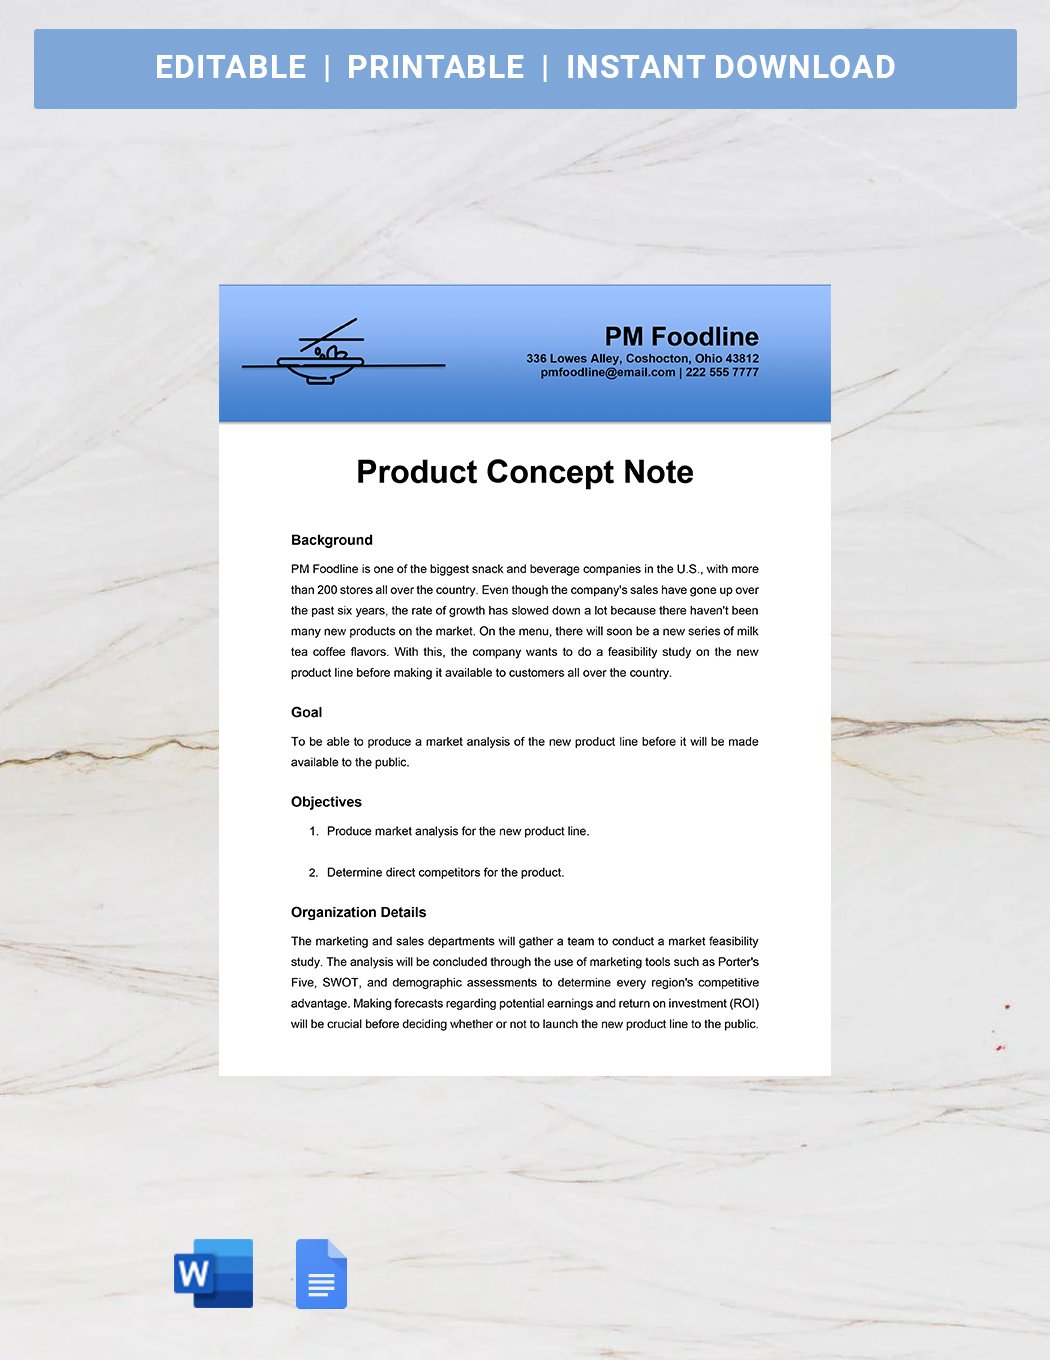 Concept Note Word Templates Design Free Download Template net